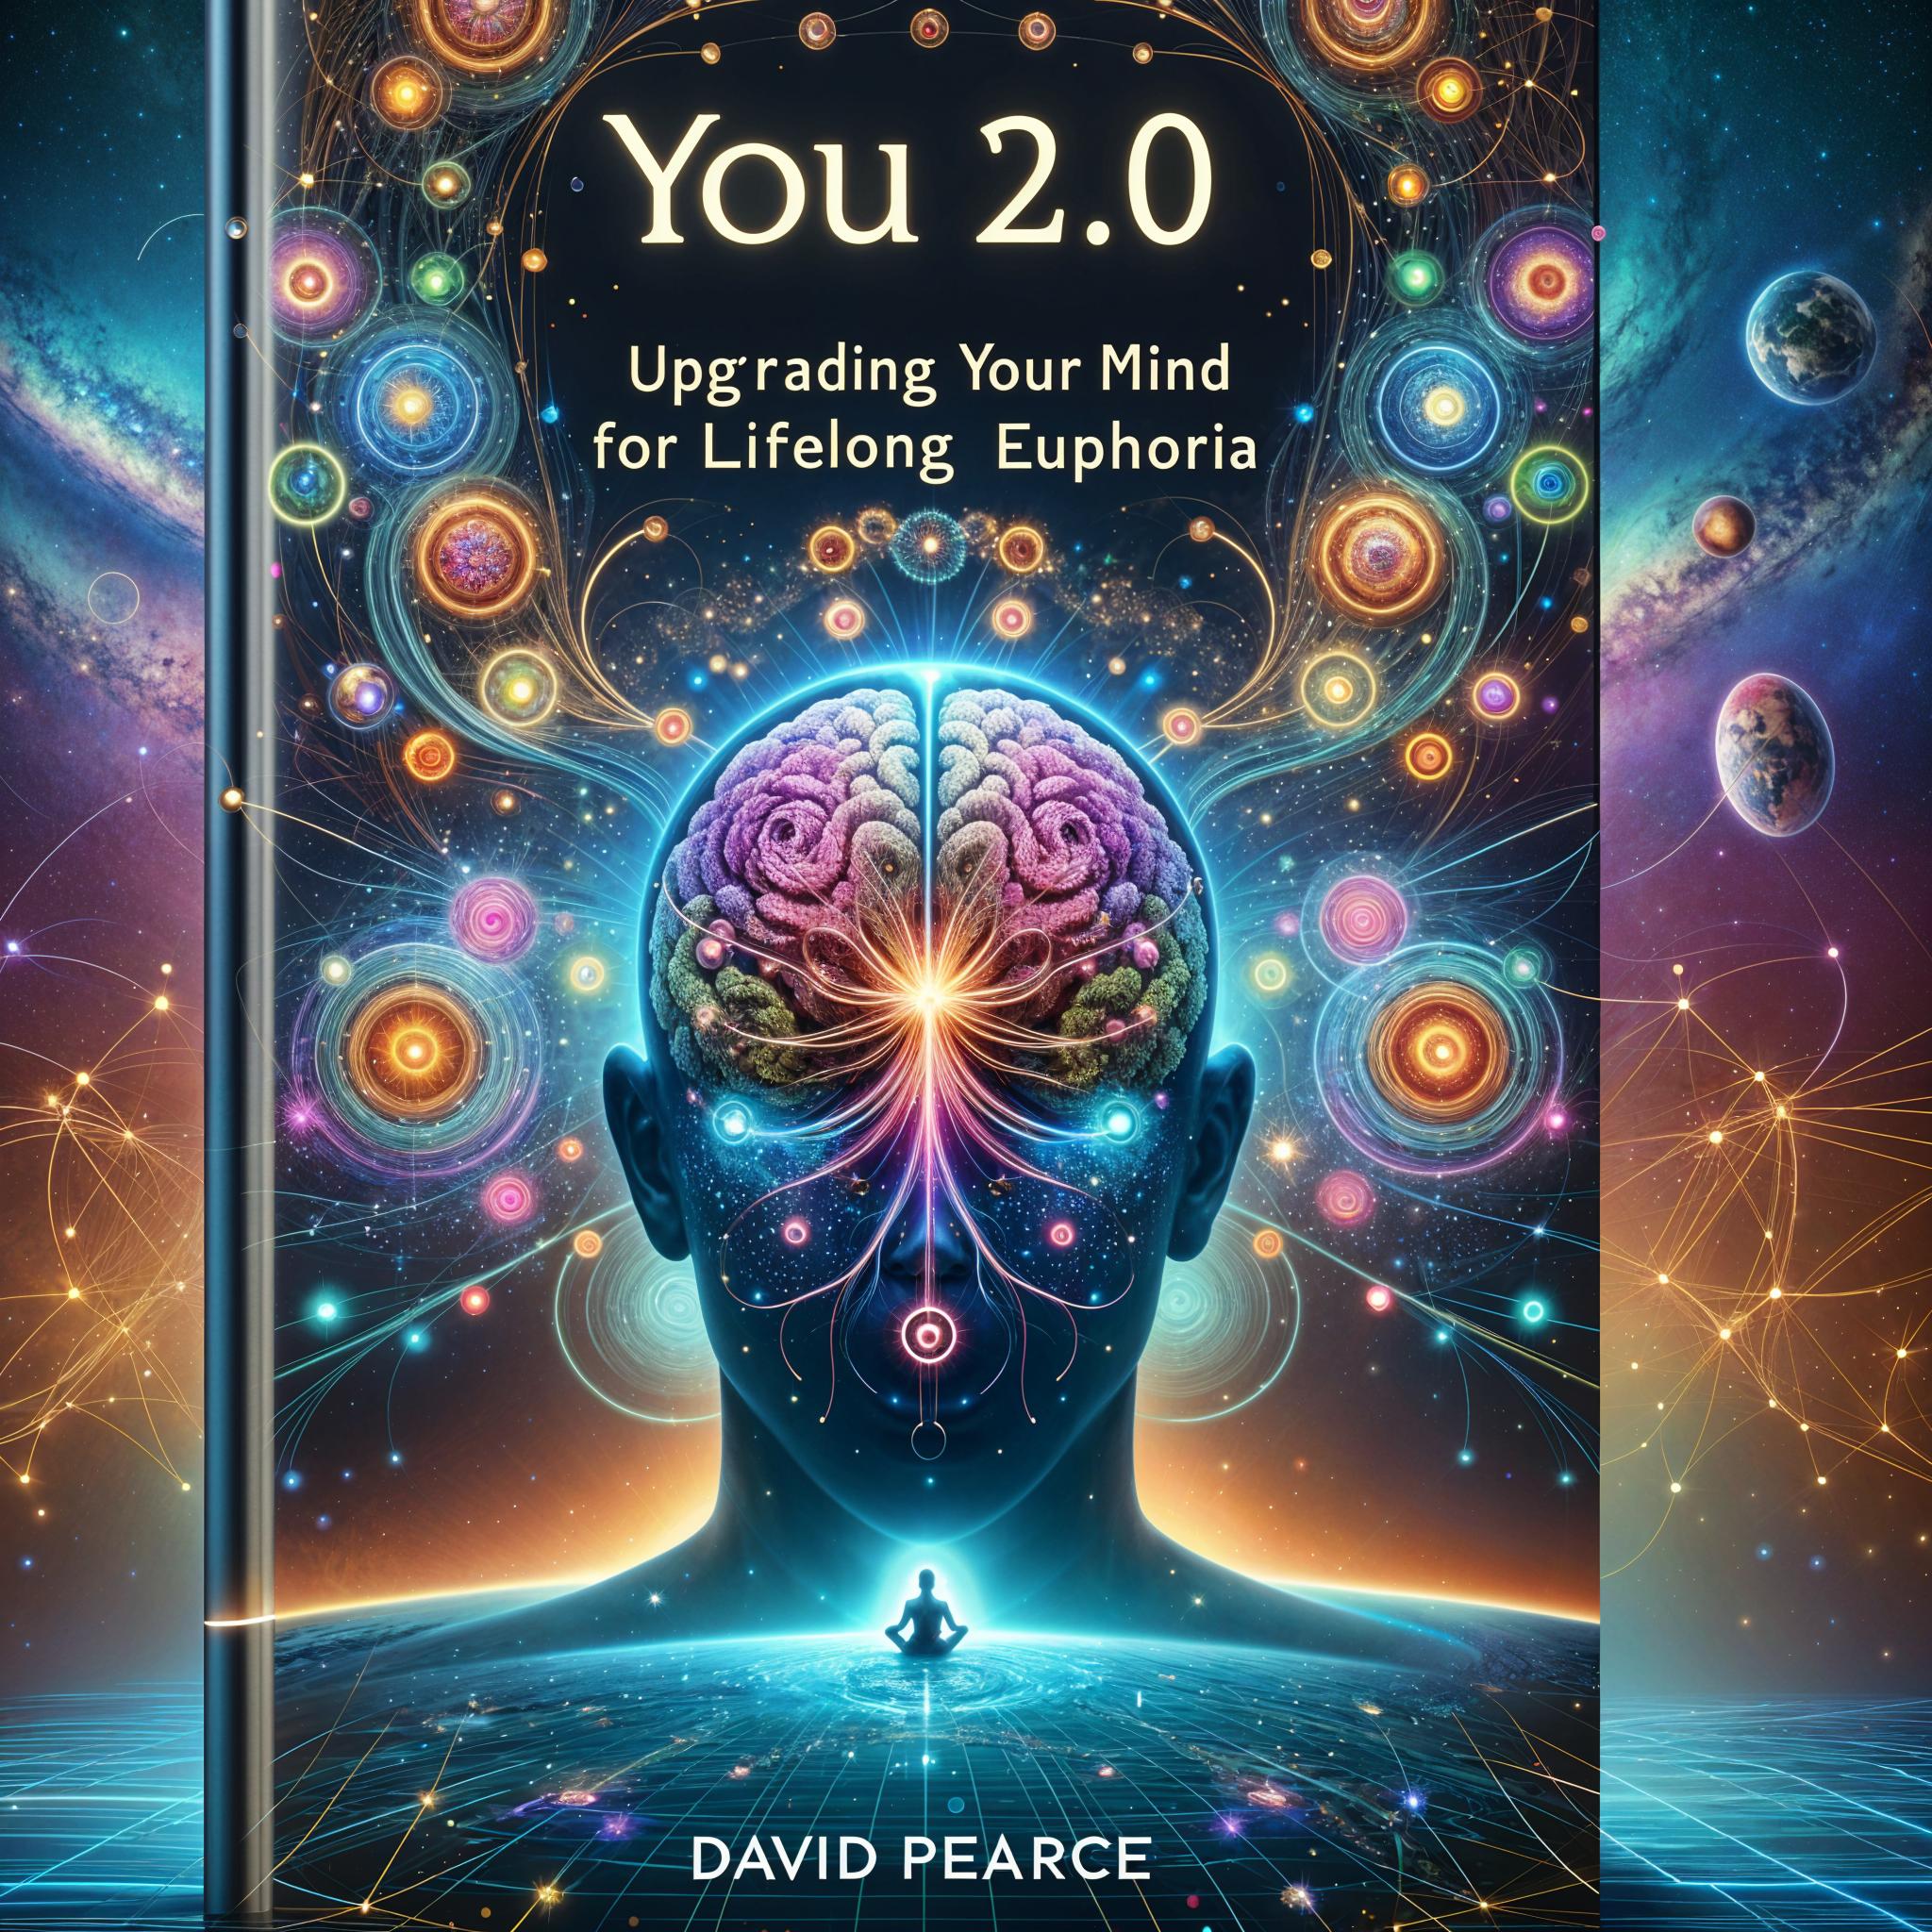 You 2.0: Upgrading Your Mind for Lifelong Euphoria by David Pearce